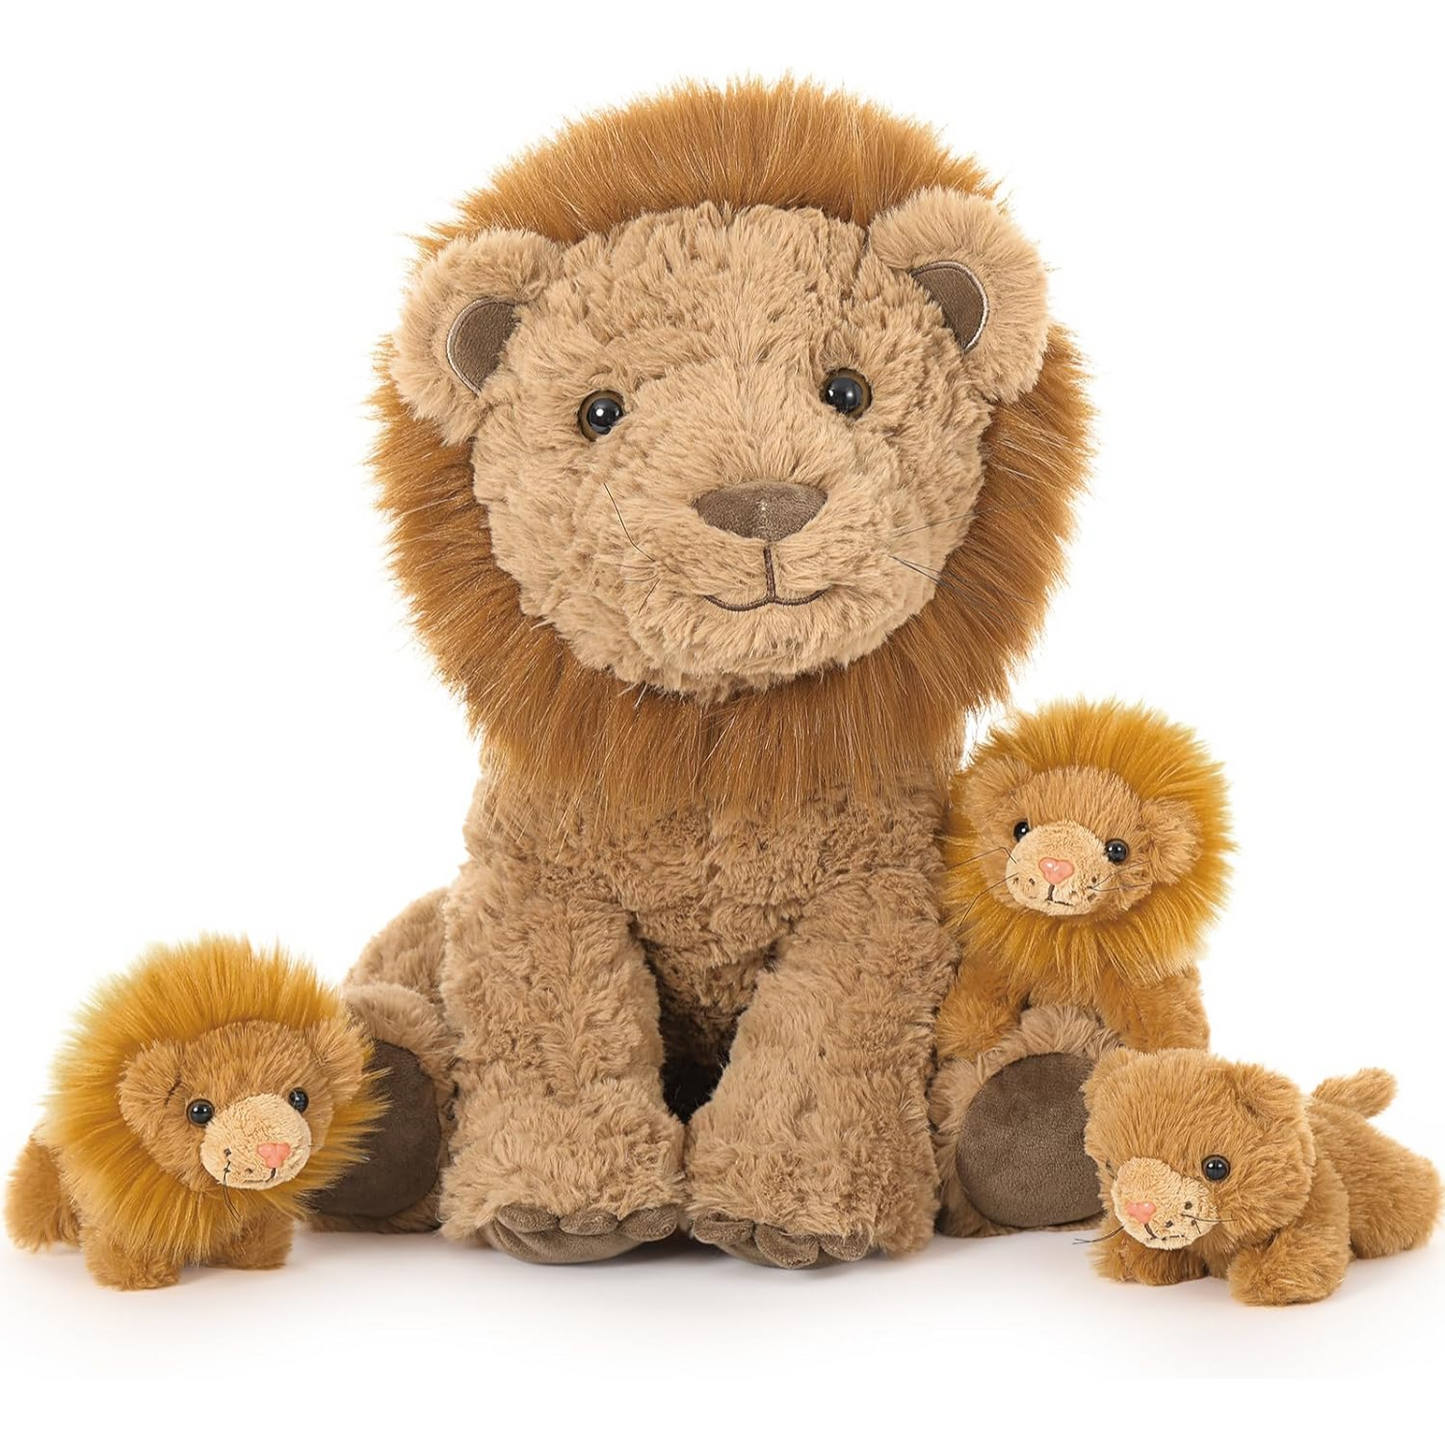 The lion plush toy is adorned with a majestic mane encircling its head, making it look quite imposing. Its bright eyes and friendly smile give it a cute and endearing appearance. And the best part? Unzip the back and find three adorable mini lions hiding inside - what a delightful surprise! Grab one for a friend who loves lions and spread some joy!